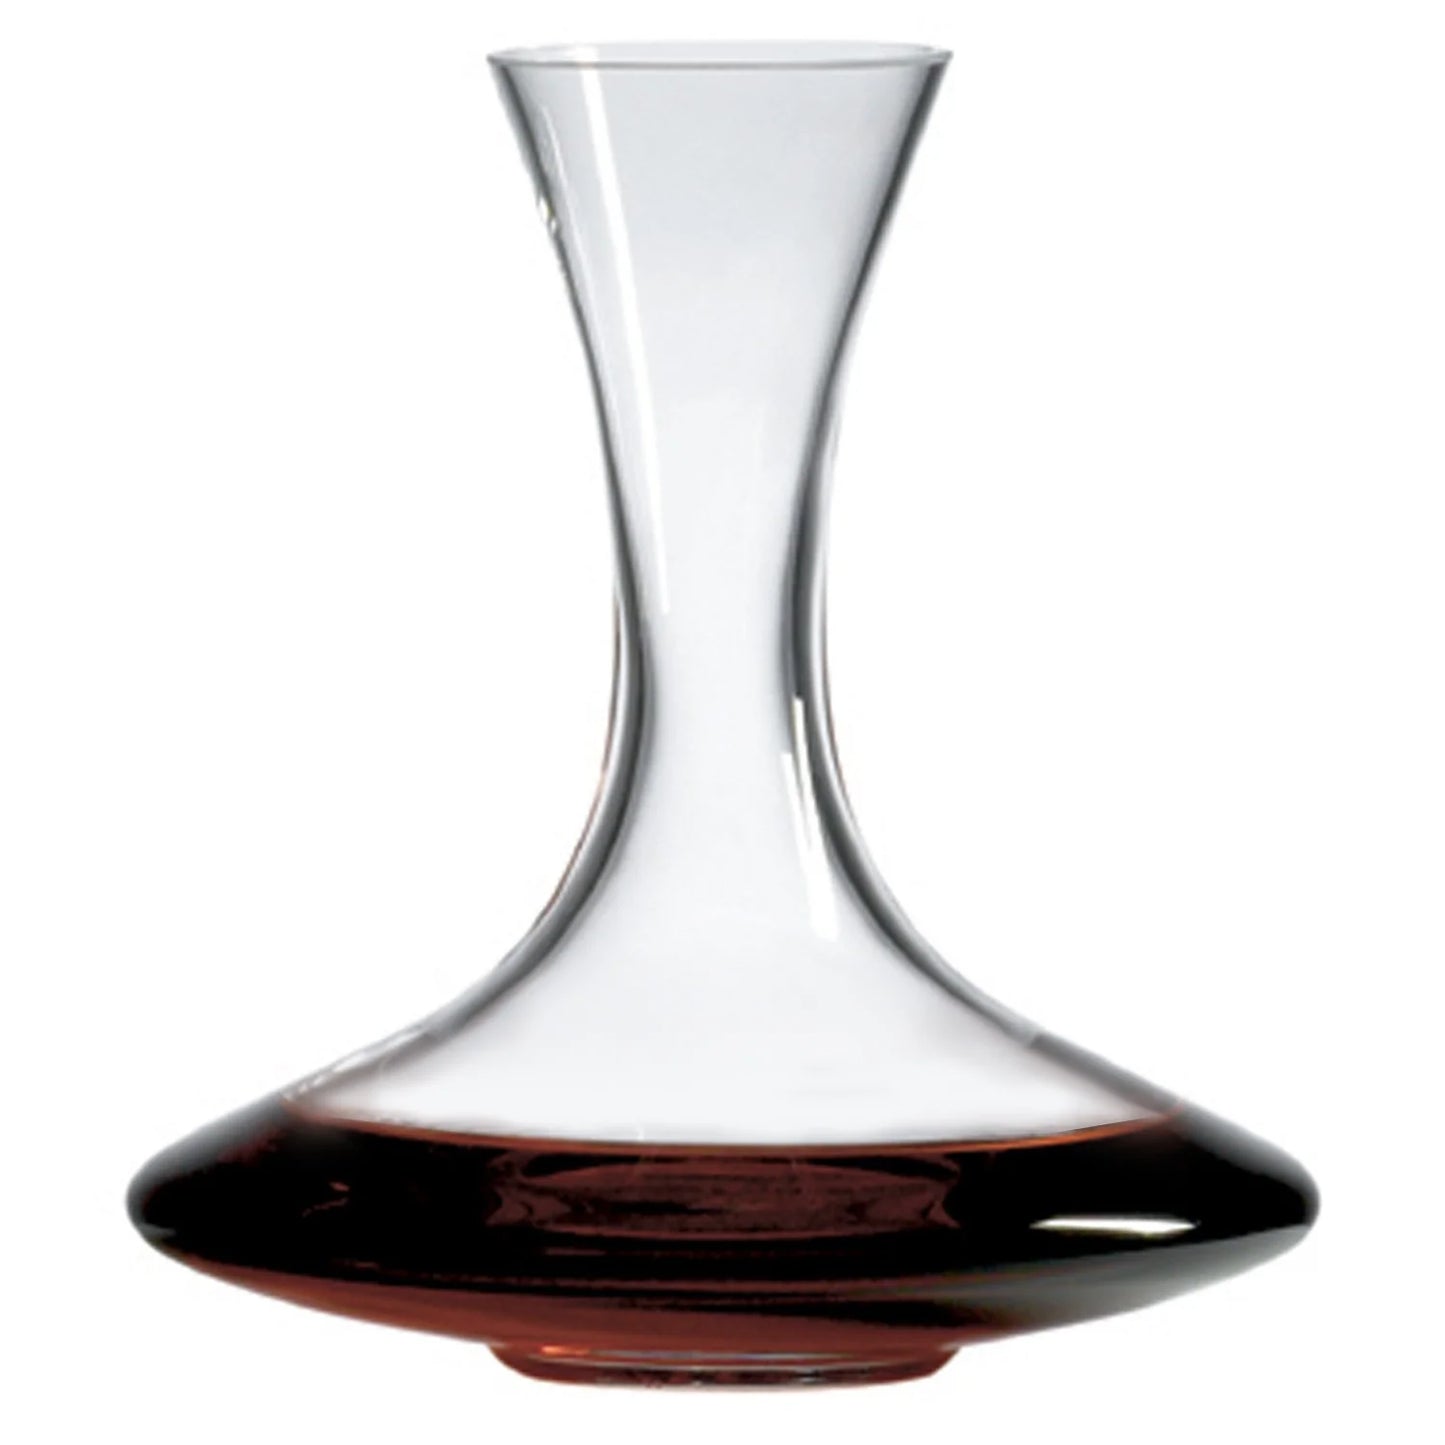 Ravenscroft Crystal Infinity Decanter with Free Luxury Satin Decanter Bagr W3708